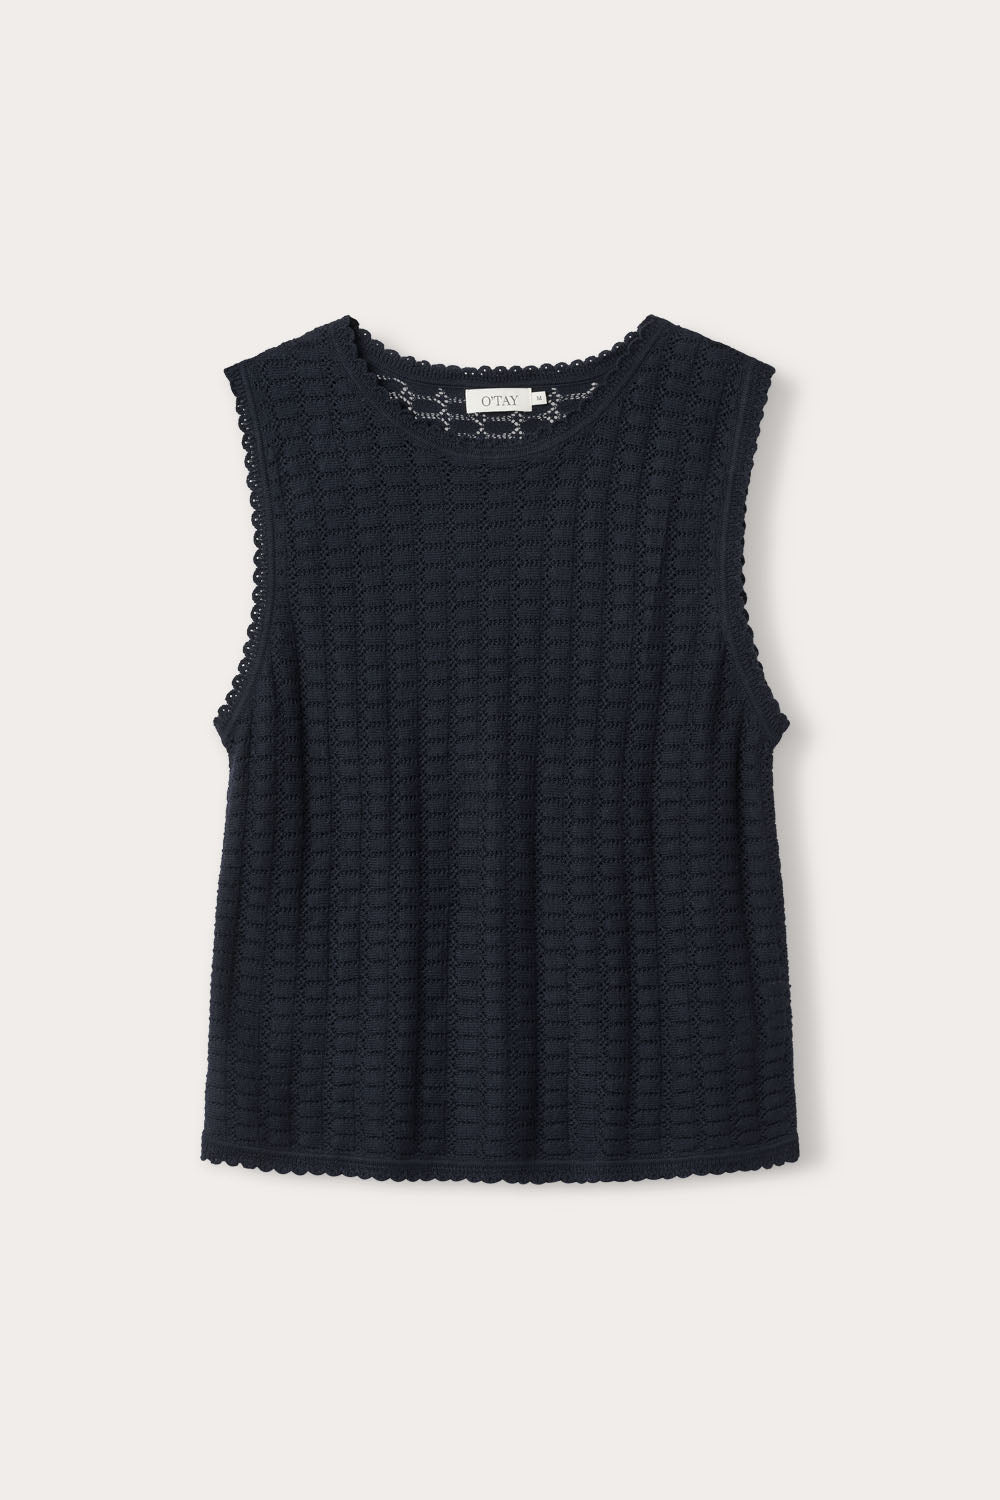 O'TAY Gabrielle Top Toppe Navy